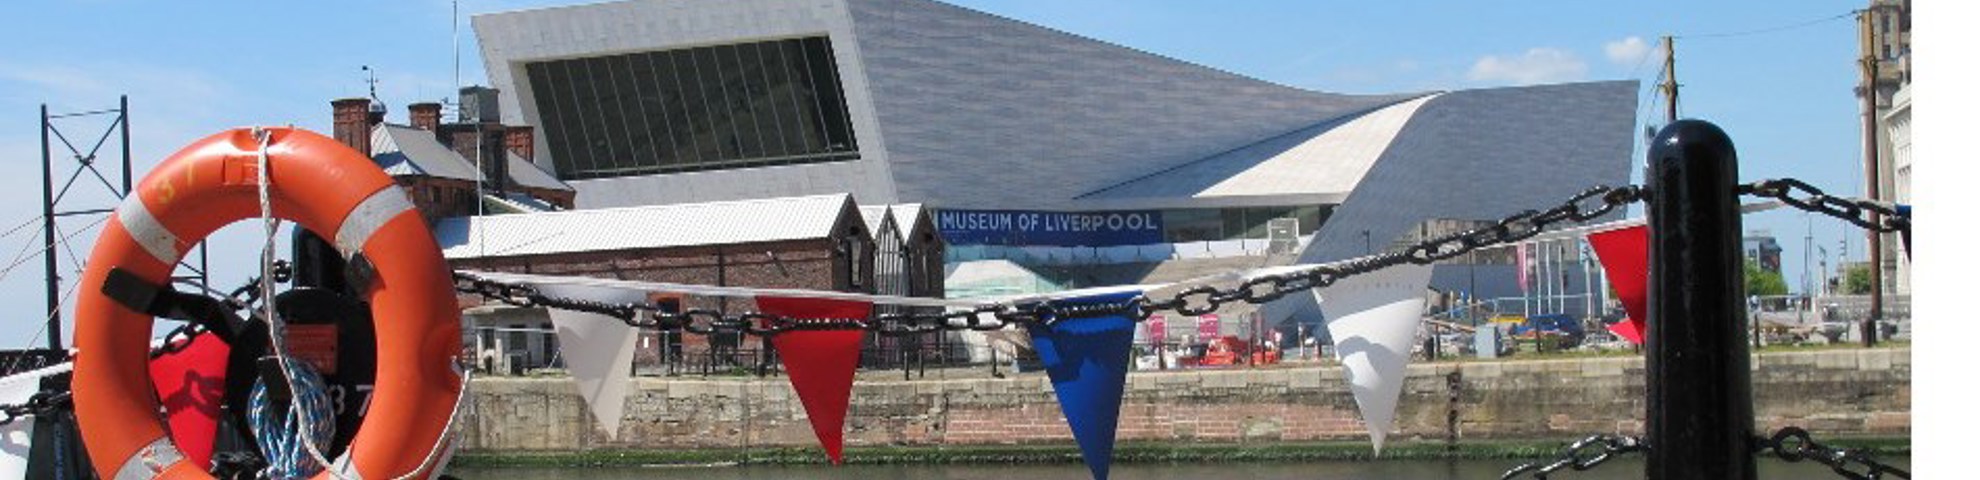 The exterior of the museum at daytime. There are flags and a lifebuoy on a railing infront of the building.